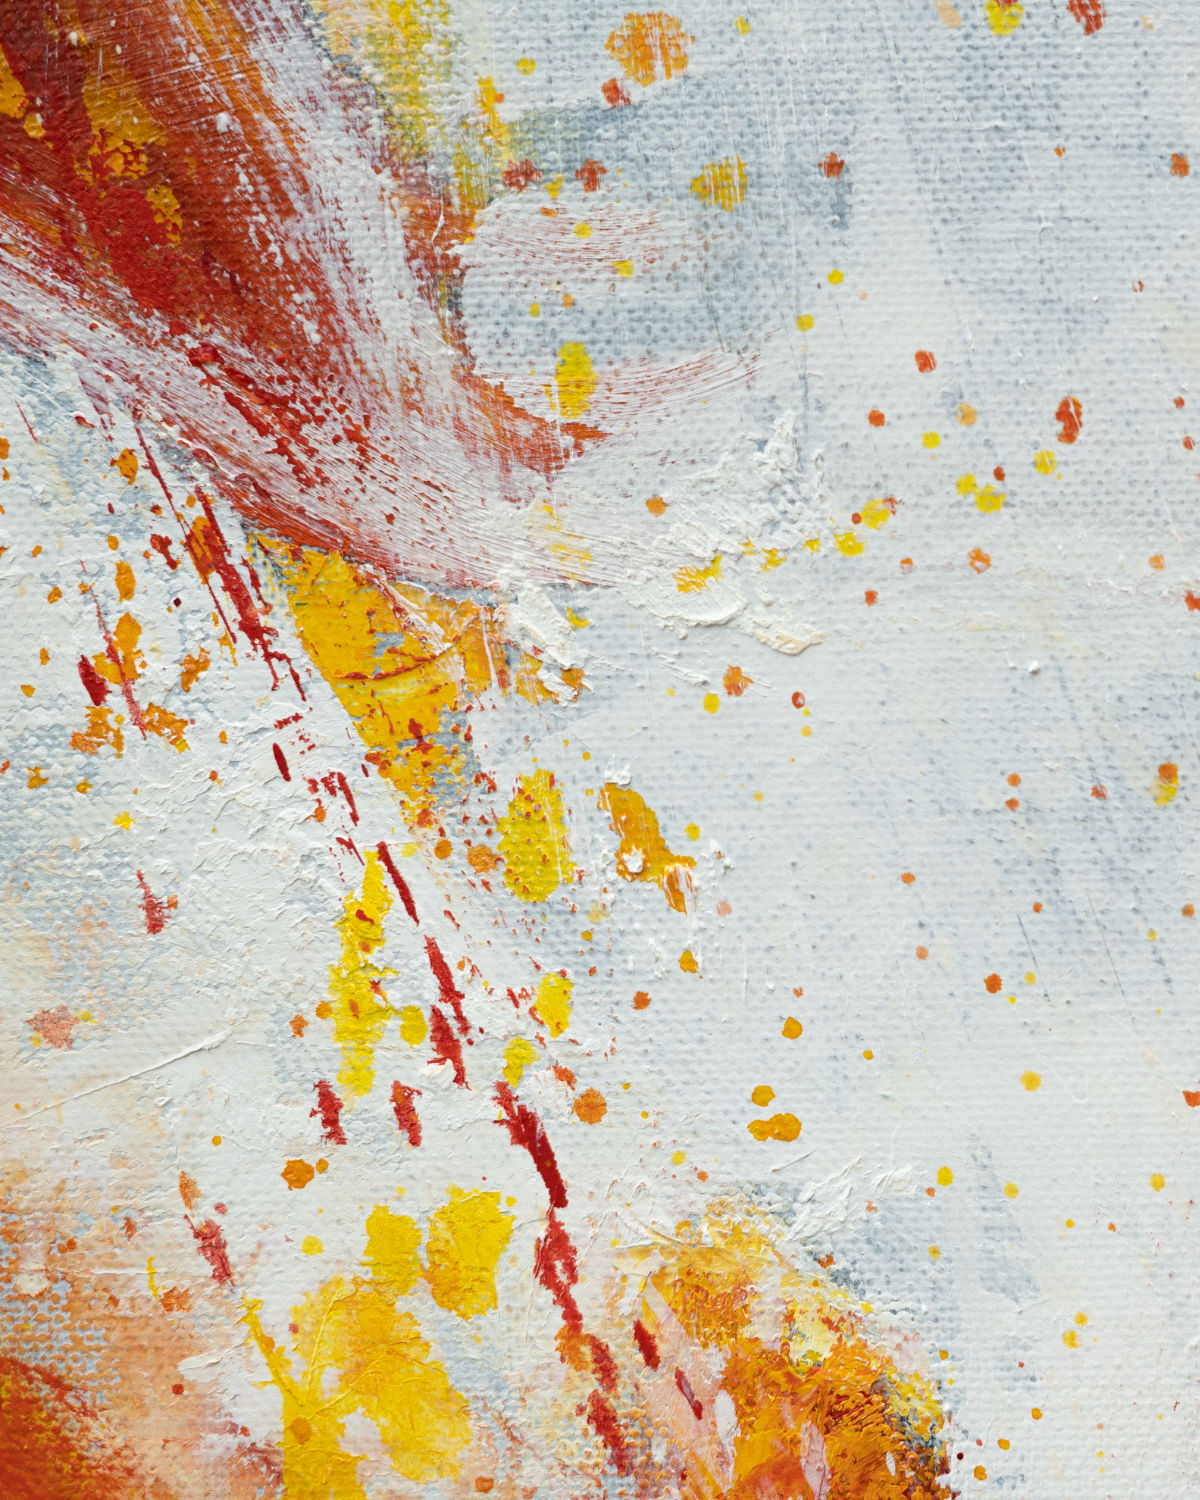 detail of original oil painting and mixed media by cassidy austin studios. orange pop-art textured nude woman in power stance. Titled: I Am Ascendant